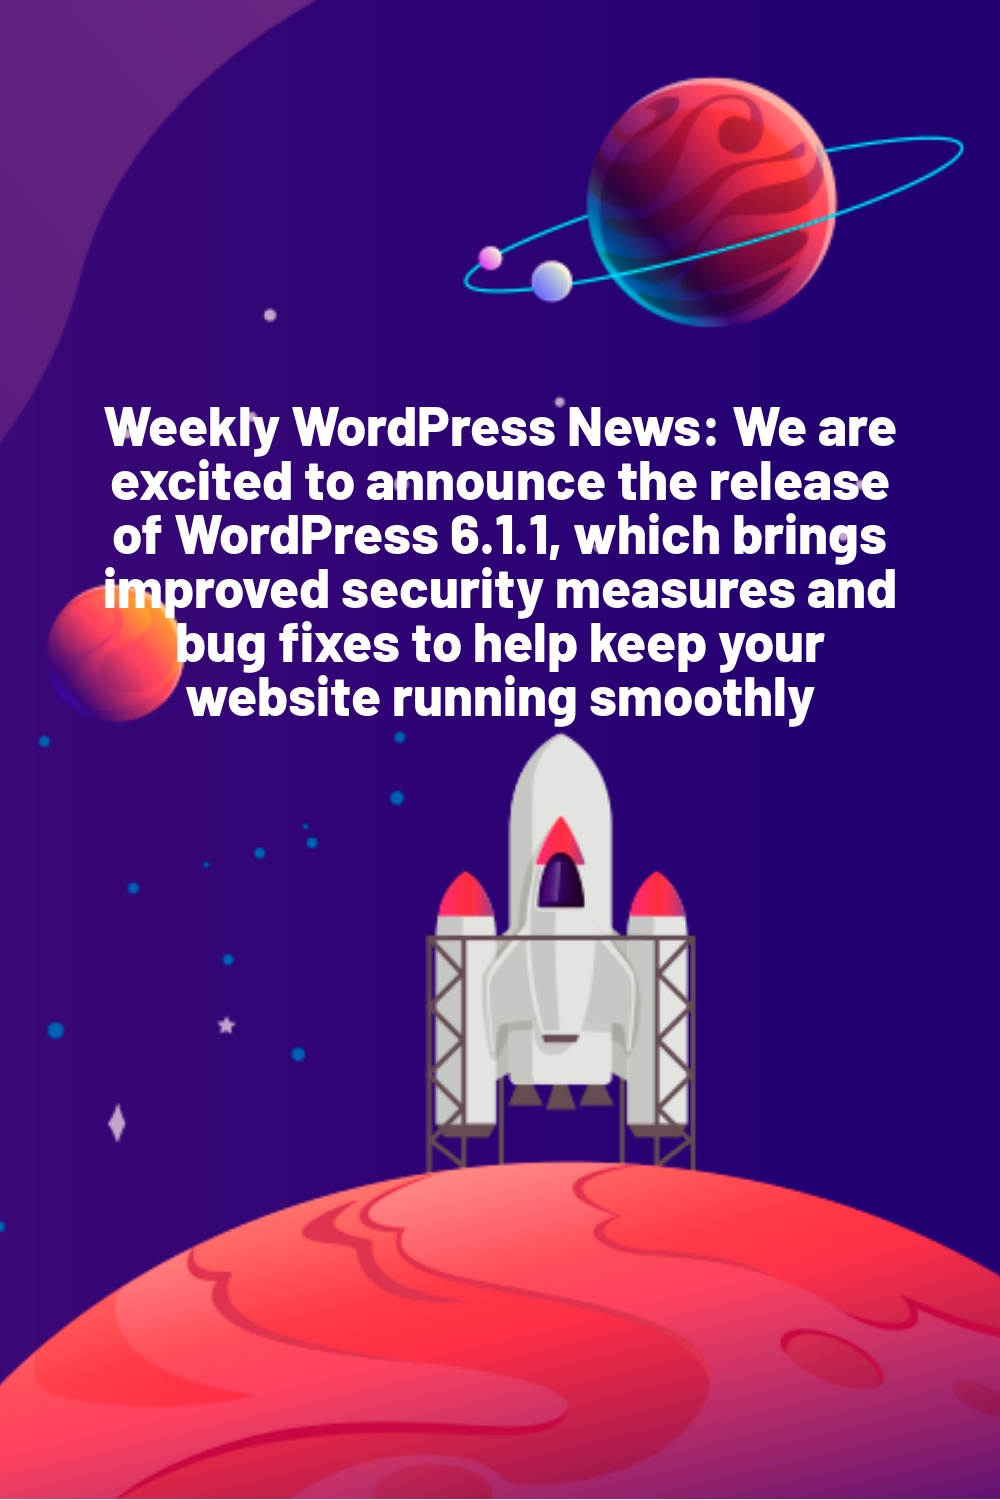 Weekly WordPress News: We are excited to announce the release of WordPress 6.1.1, which brings improved security measures and bug fixes to help keep your website running smoothly